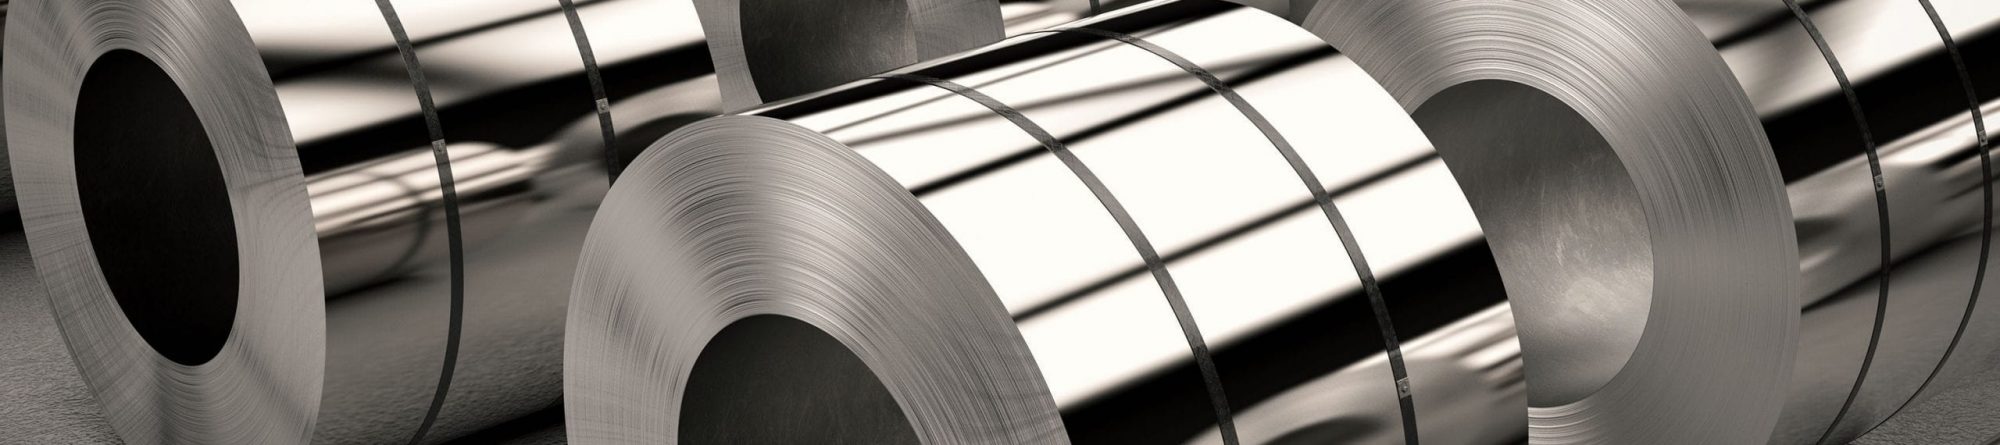 About stainless steel -